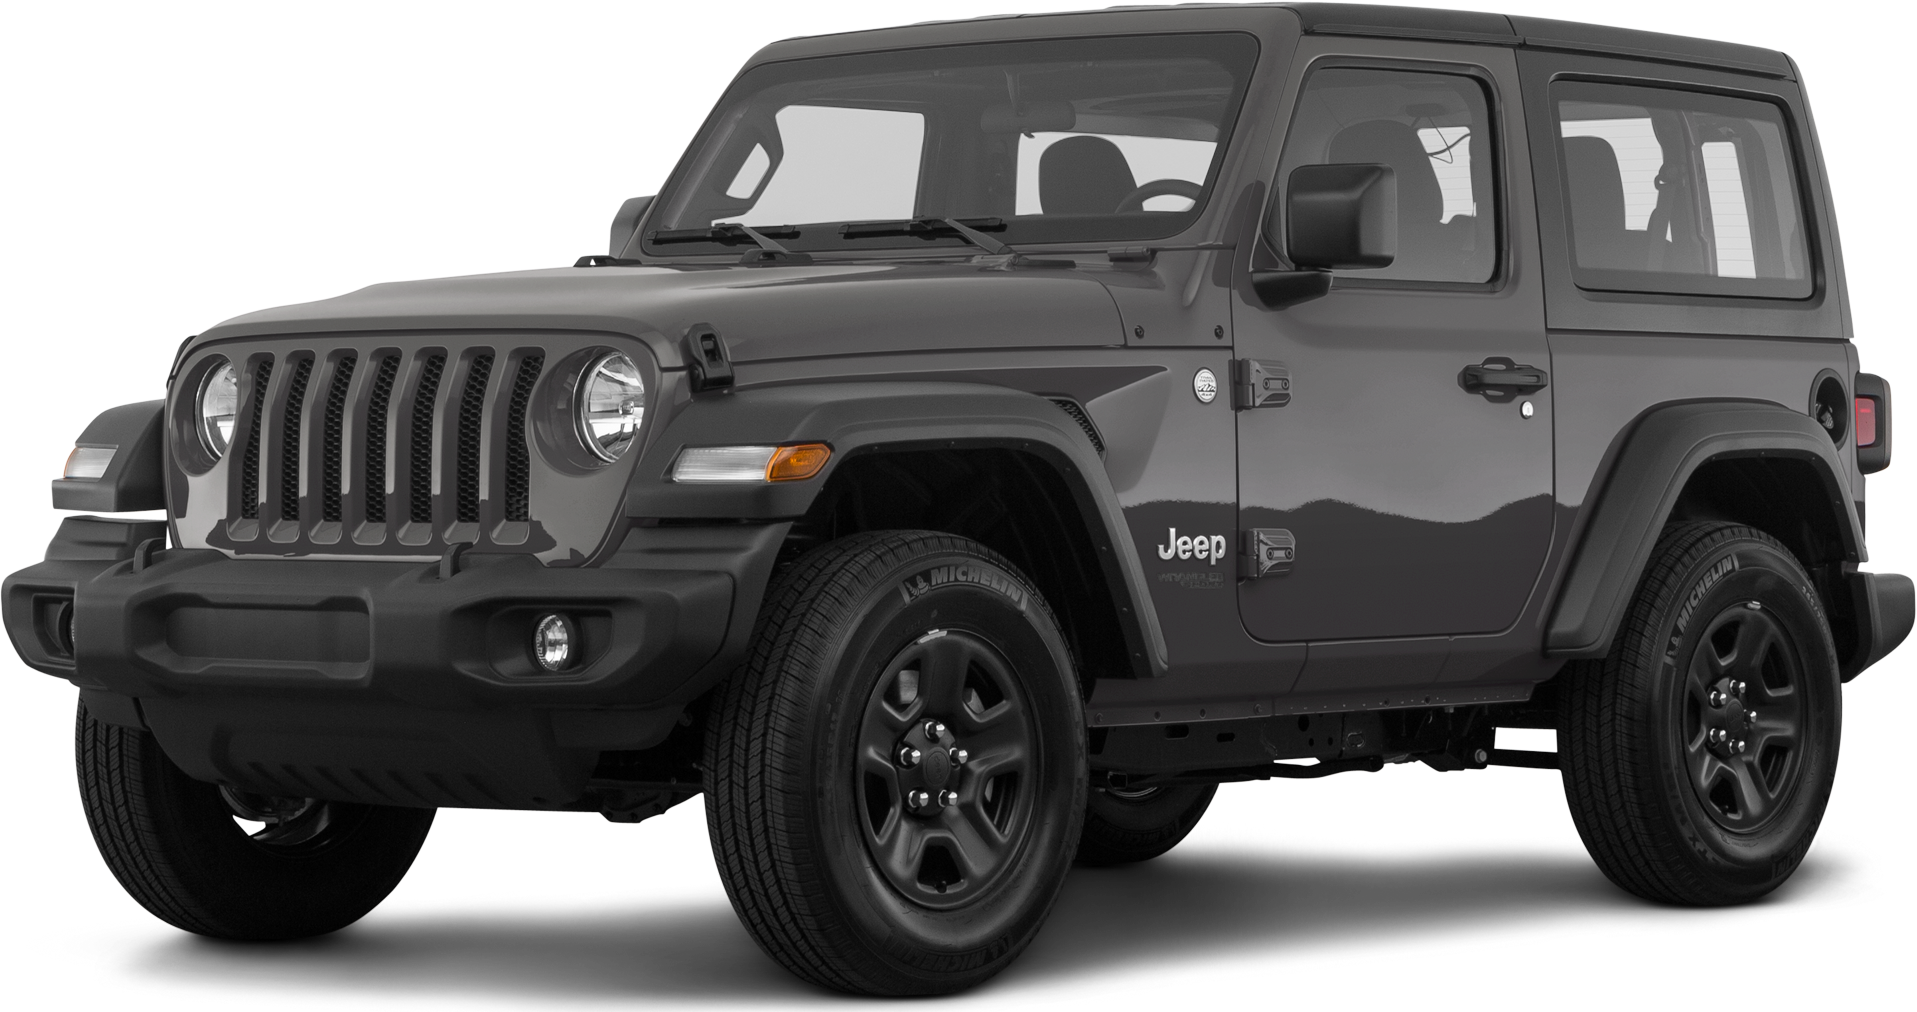 2020 Jeep Wrangler Hitch Receiver Sale Outlet